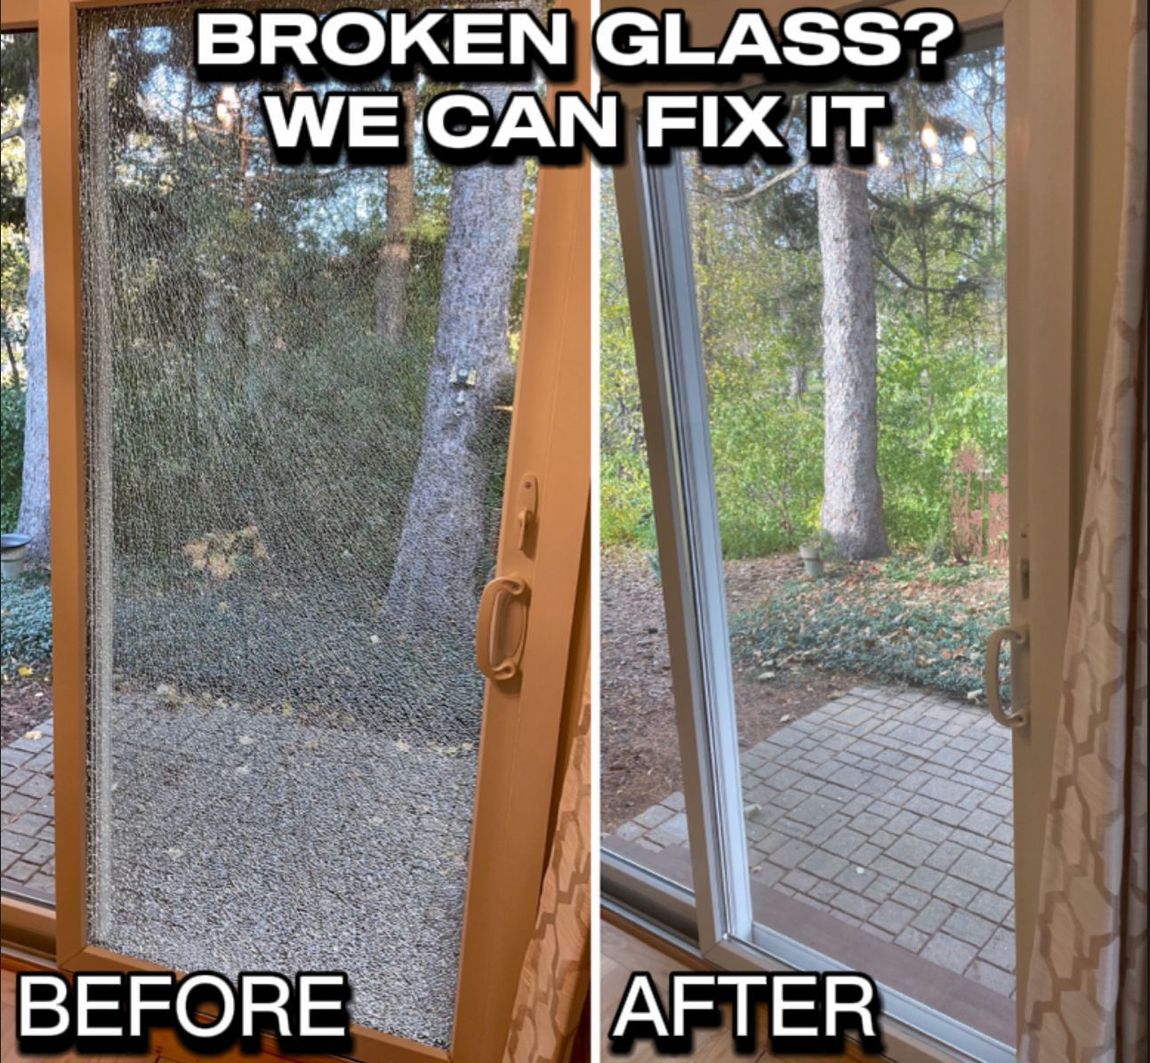 Broken Glass Before and after image